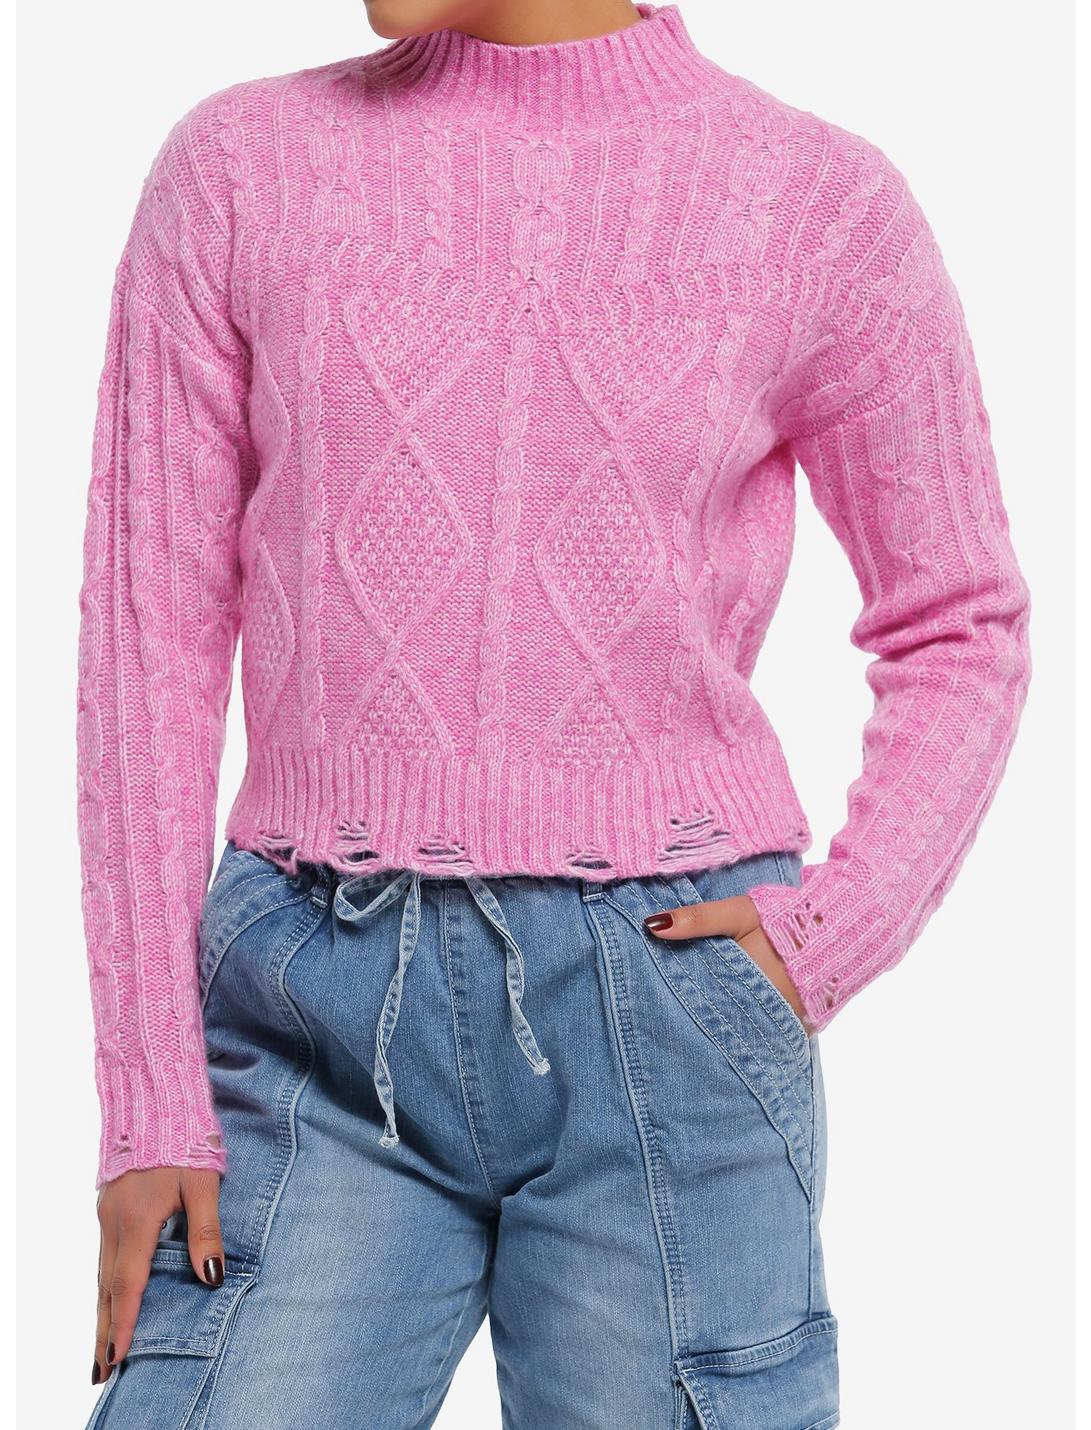 Magenta Cable Knit Girls Crop Sweater, PINK, hi-res